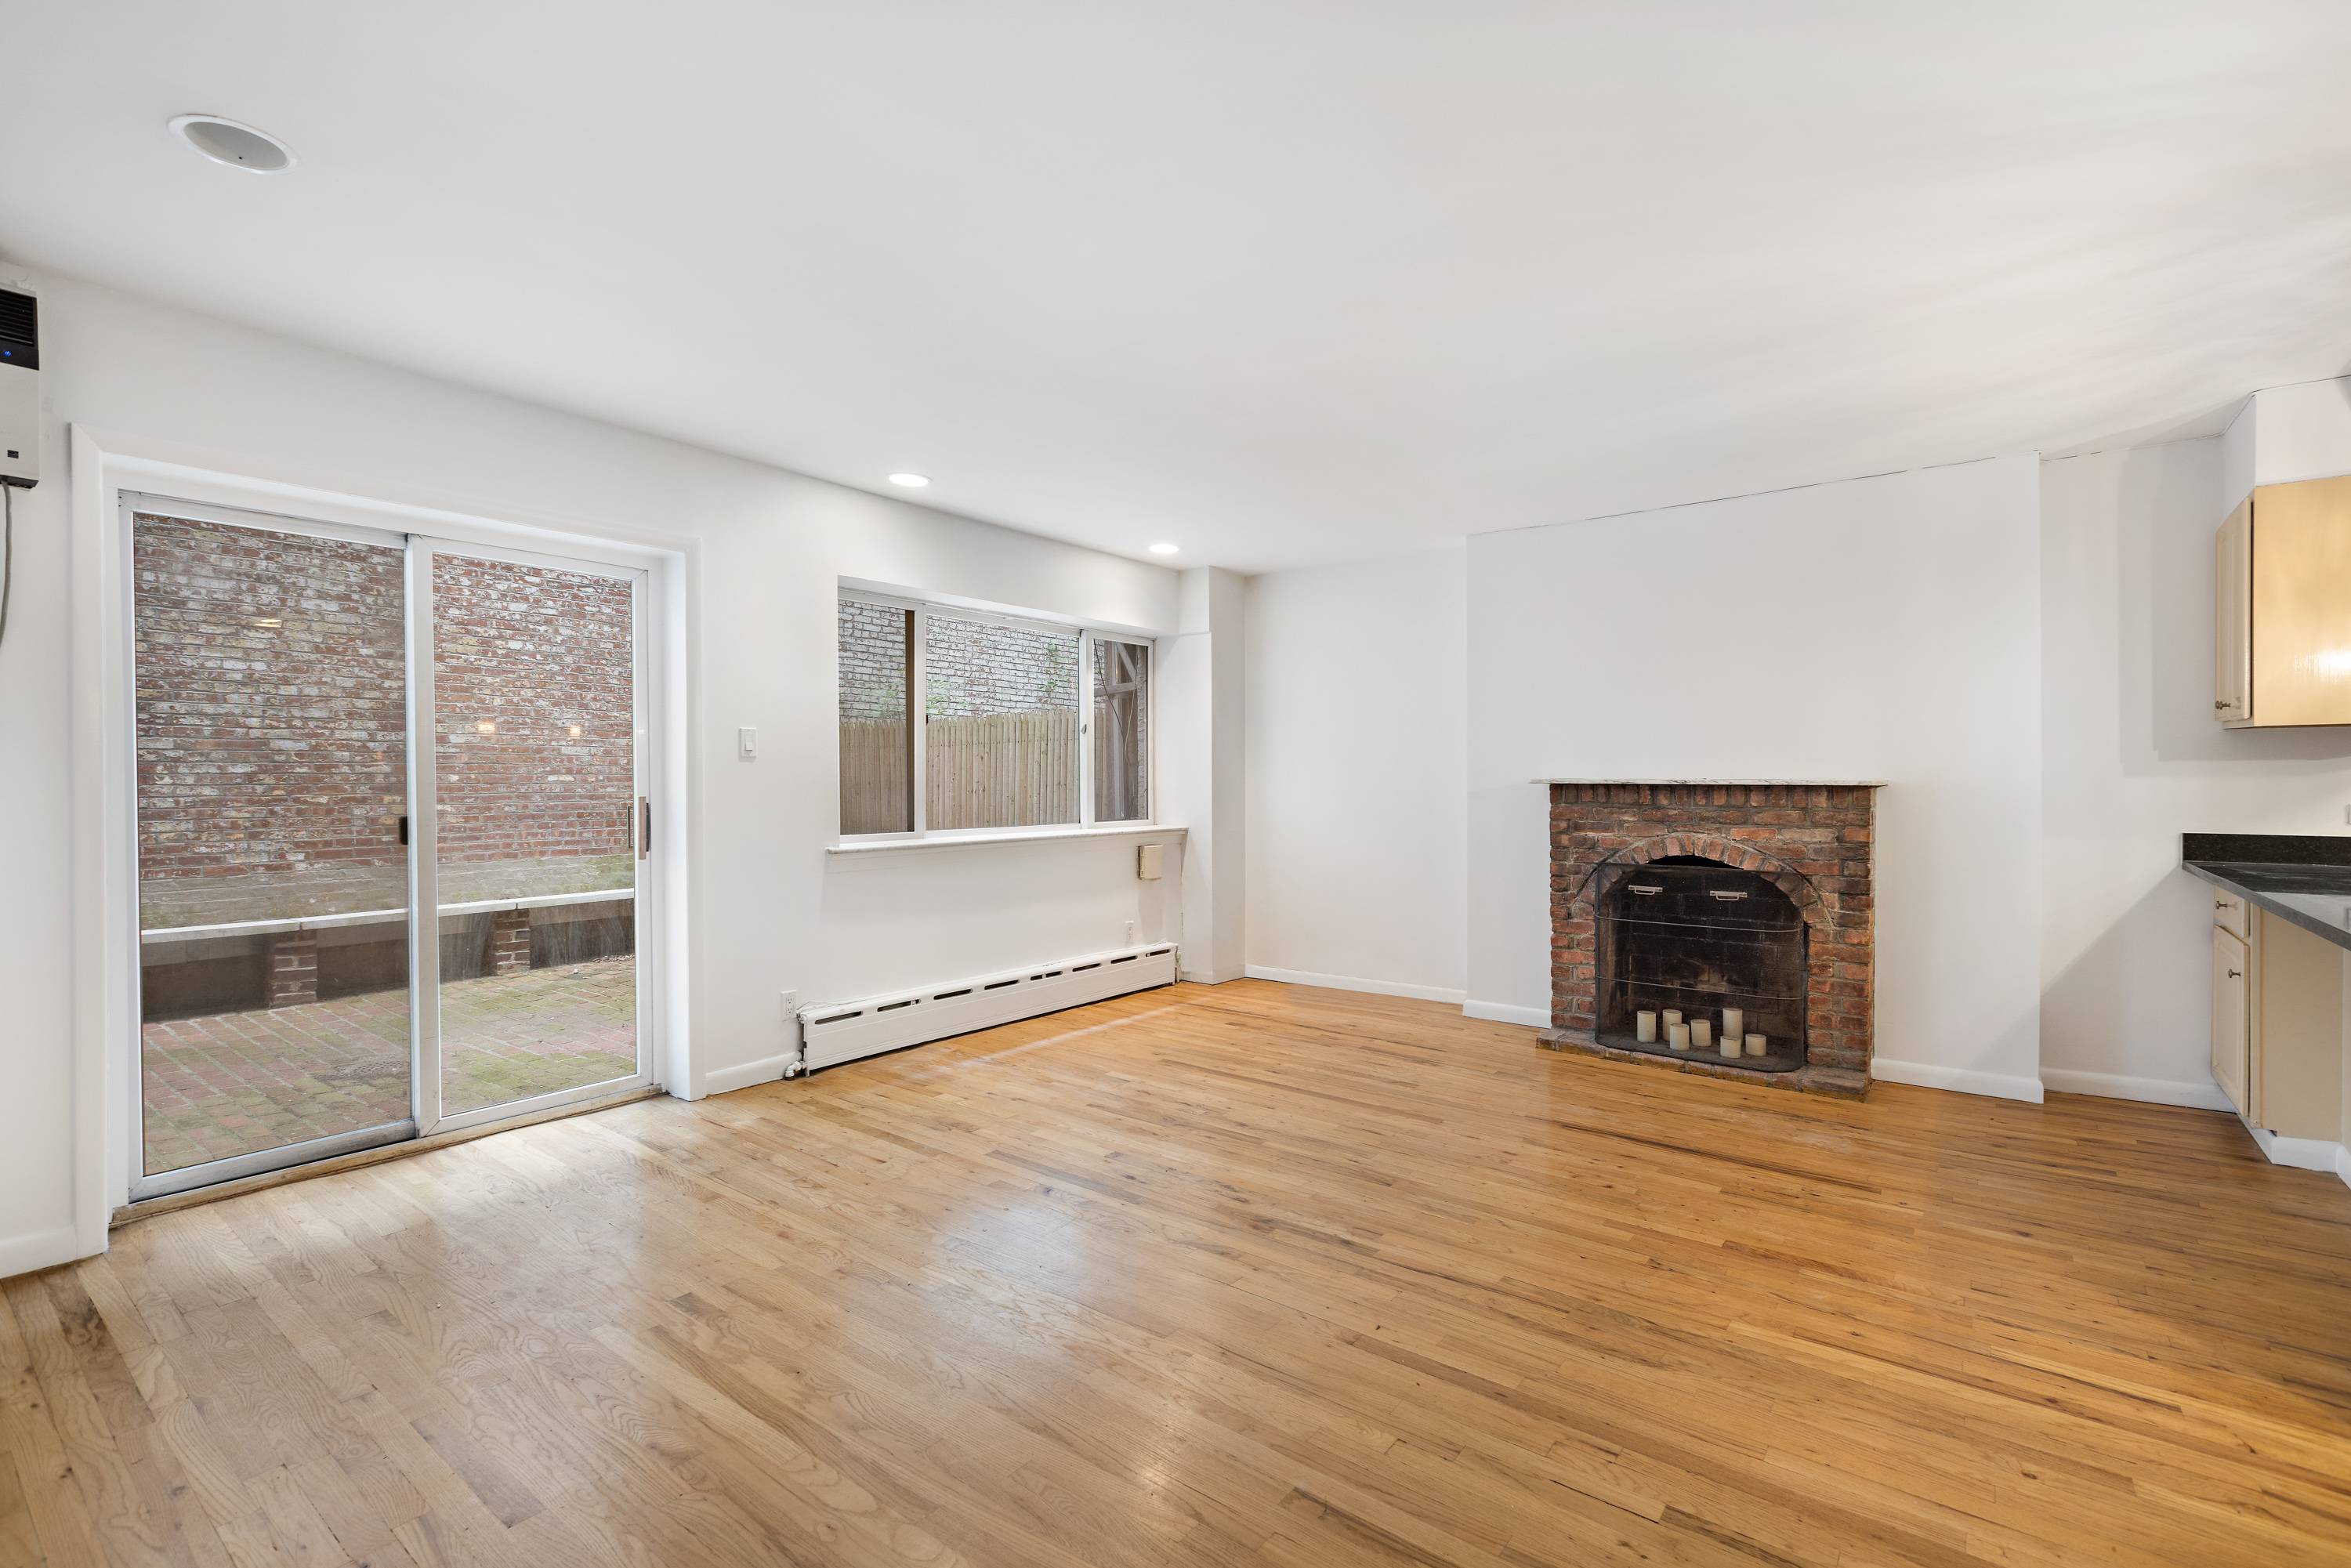 Elegant Park Avenue Townhouse apartment conveniently located in Carnegie Hill near, Museum Mile, Central Park, Madison Ave restaurants and transportation.